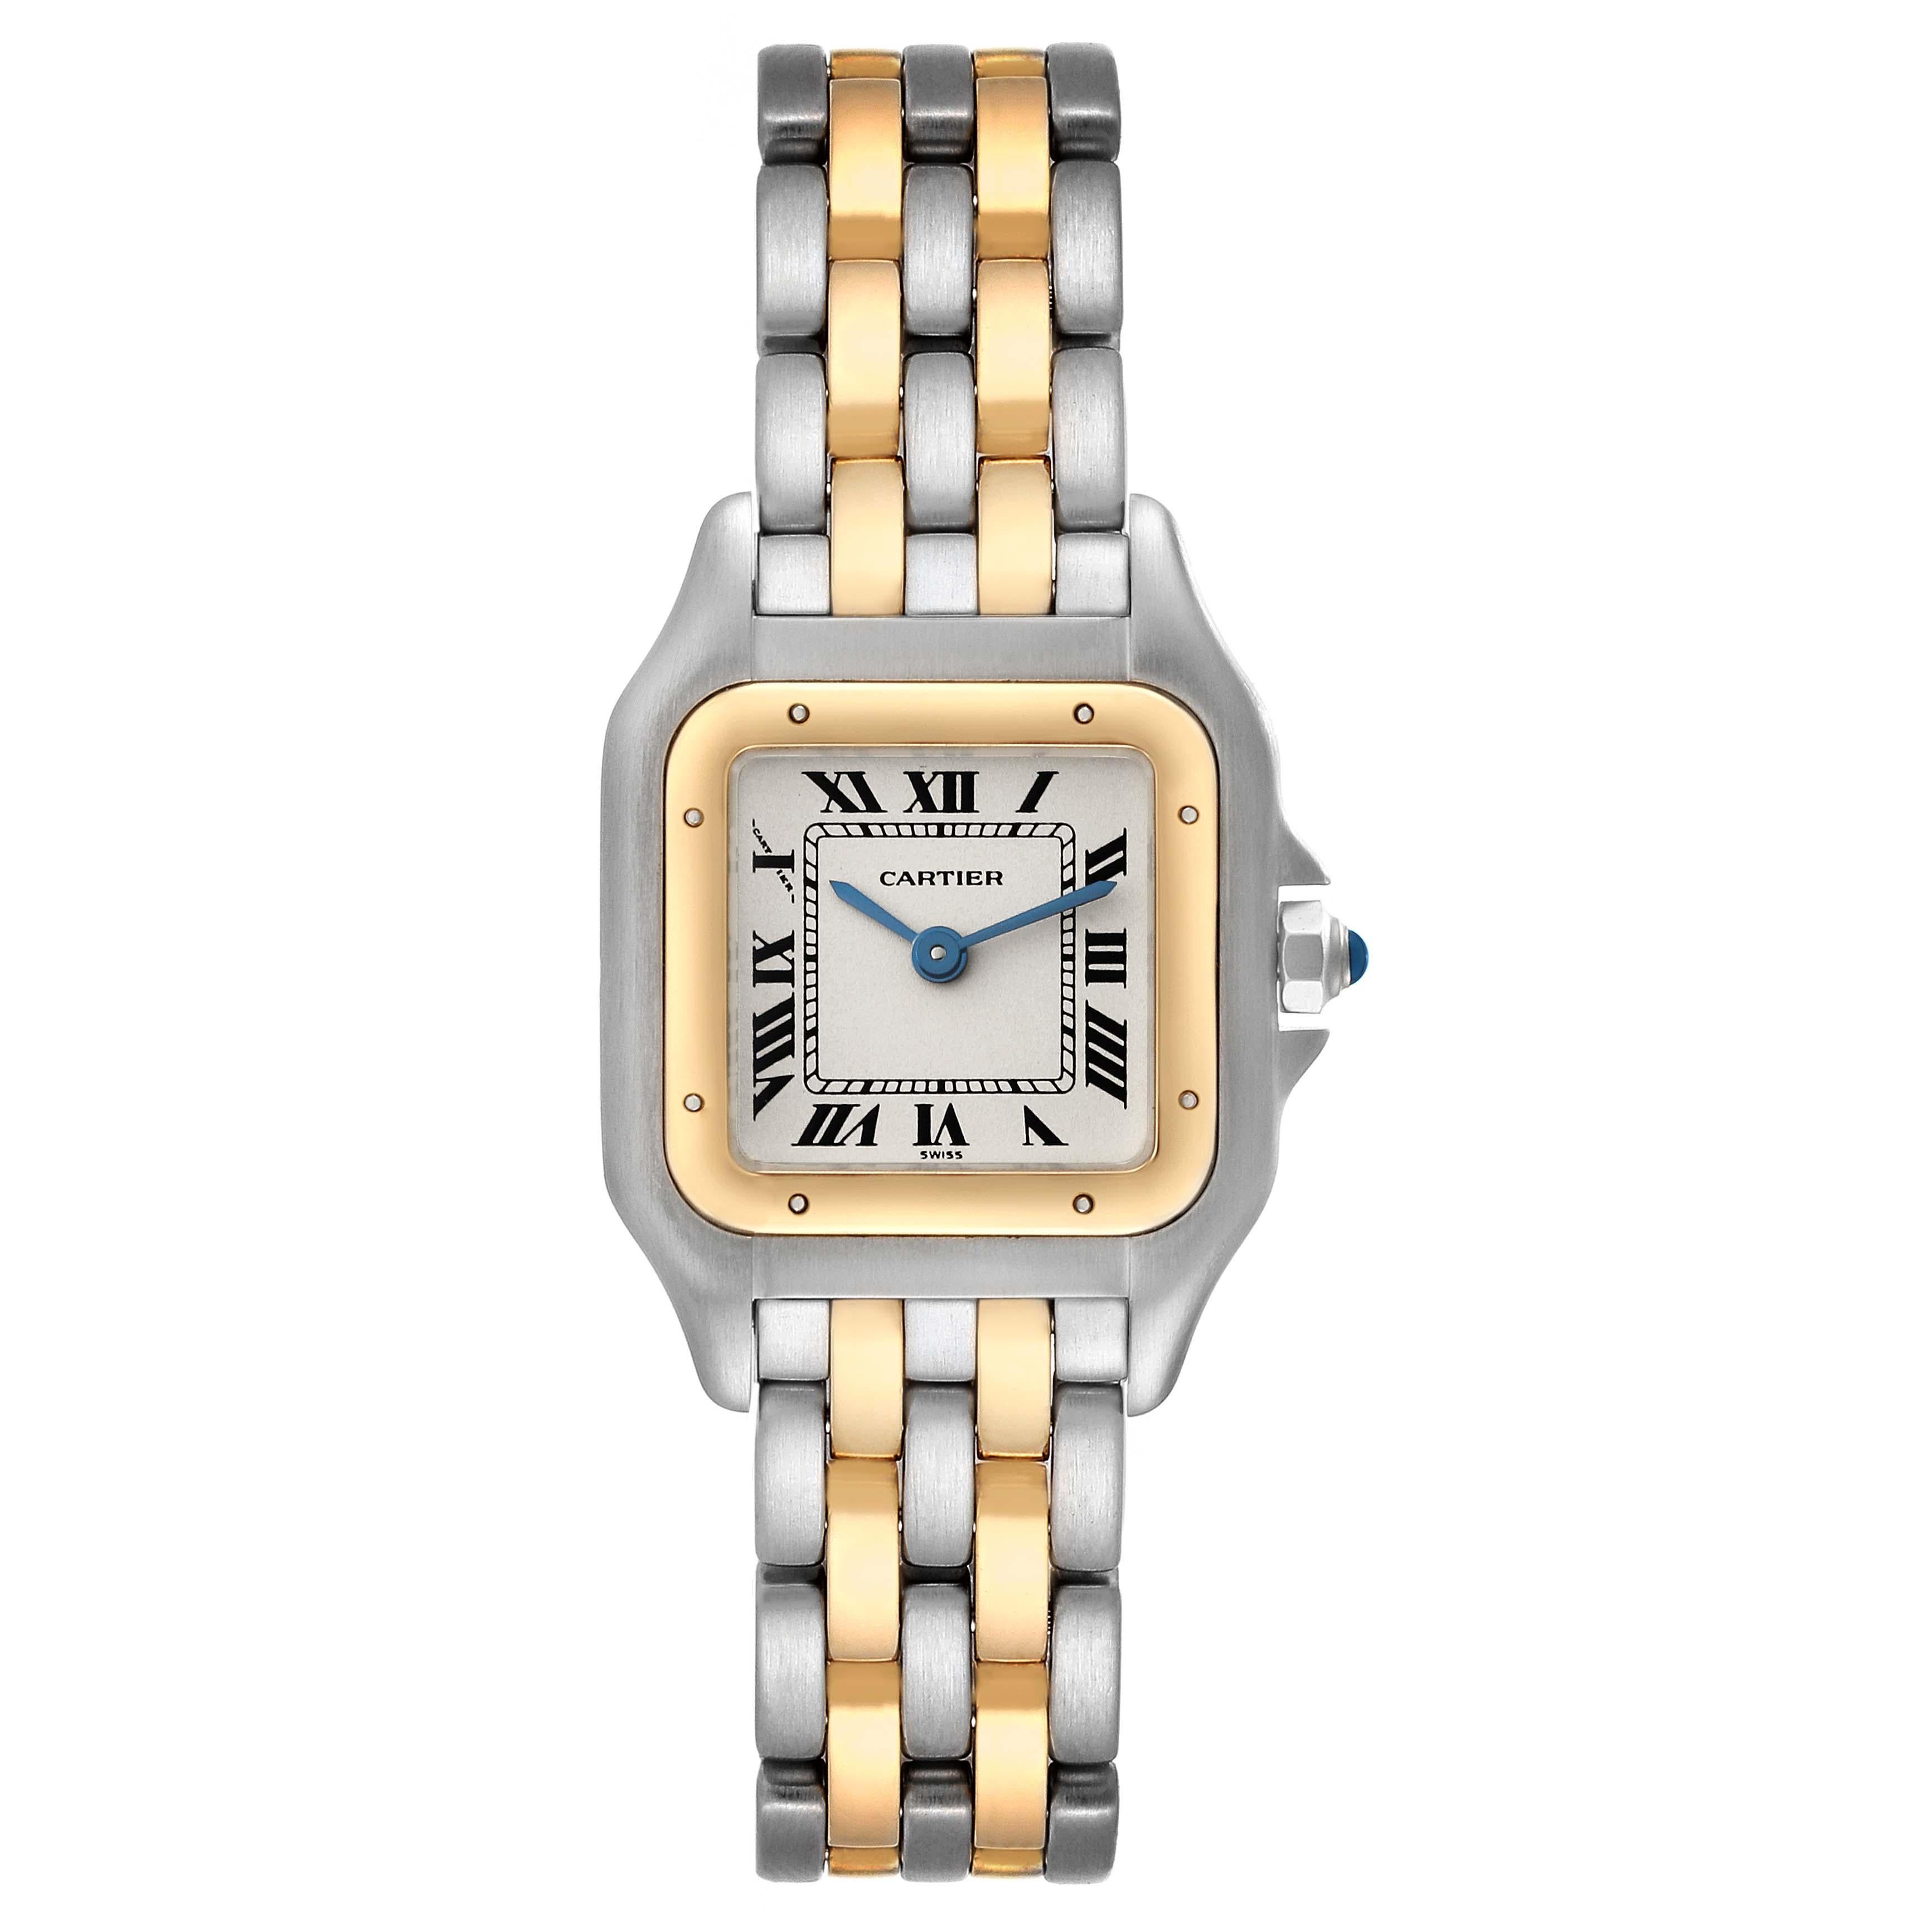 Cartier Panthere Steel Yellow Gold Two Row Ladies Watch W25029B6. Quartz movement. Stainless steel case 30 x 22 mm. Octagonal crown set with a blue spinel cabochon. 18K yellow gold bezel, secured with 8 pins. Scratch resistant sapphire crystal.